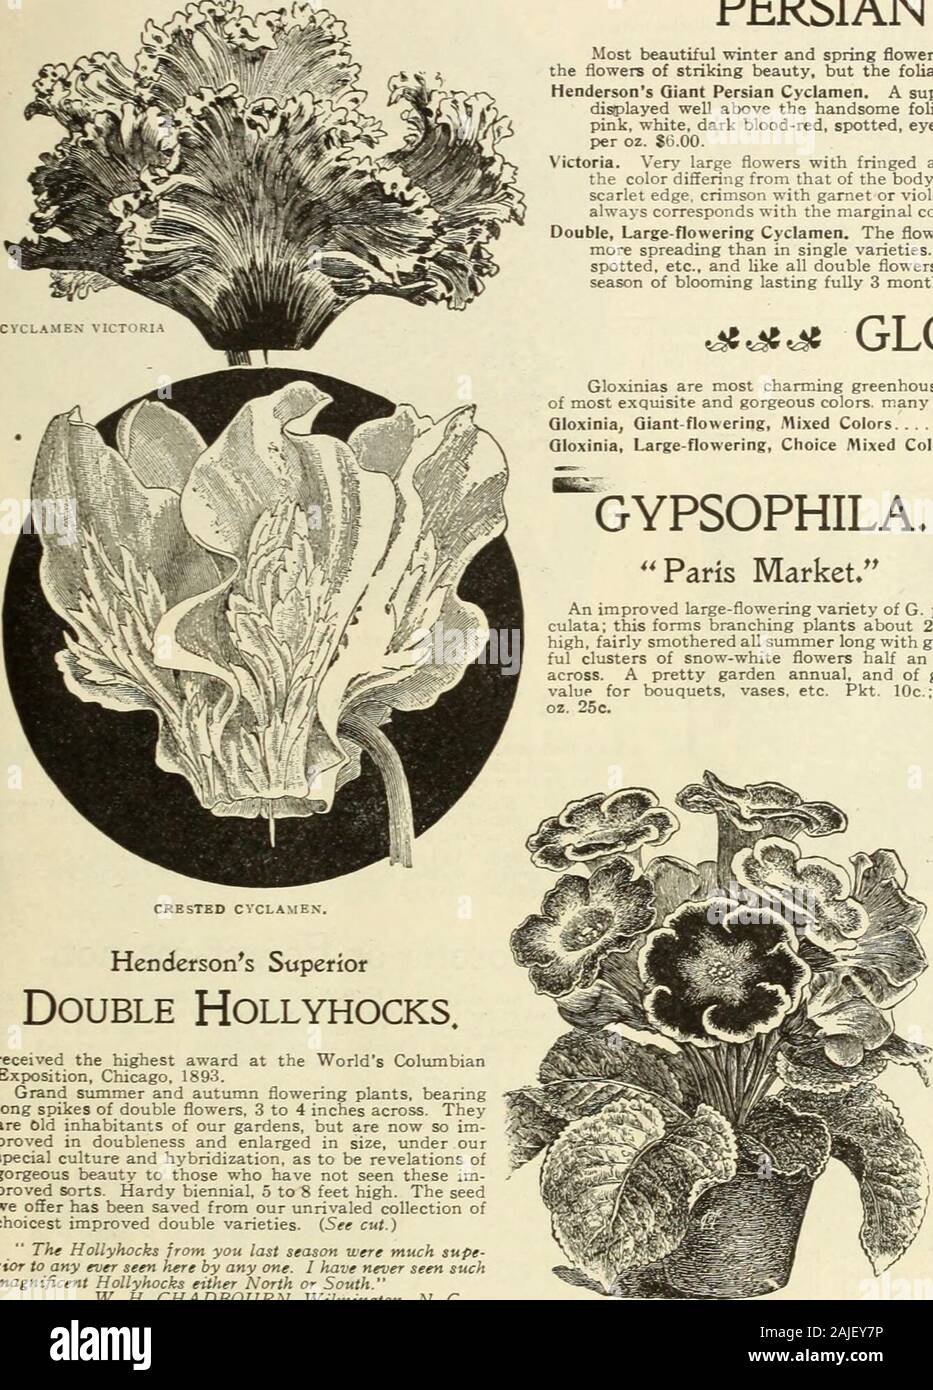 Florists' wholesale catalogue : seeds, bulbs, plants, &c . e shown inone flower, covering the plant with a sheet of bloom. Large-flowering, Choicest Mixed. From prize varieties. Pkt. 25c.; per 1000 seeds75c. Double, large-flowering, Mixed. Pkt. 25c.; per 1000 seeds $1.00. Stellata, Improved Hybrids. Tall, pyramidal plants, bearing quantities of medium-sized star-like flowers in immense umbels; an exceedingly decorative pot plant.Colors, white, rose, red, carmine and blue mixed. Pkt. 25c.; per 1000 seeds 60c. My gardener raised some of the finest Cinerarias, from seed purchased from youlast spr Stock Photo